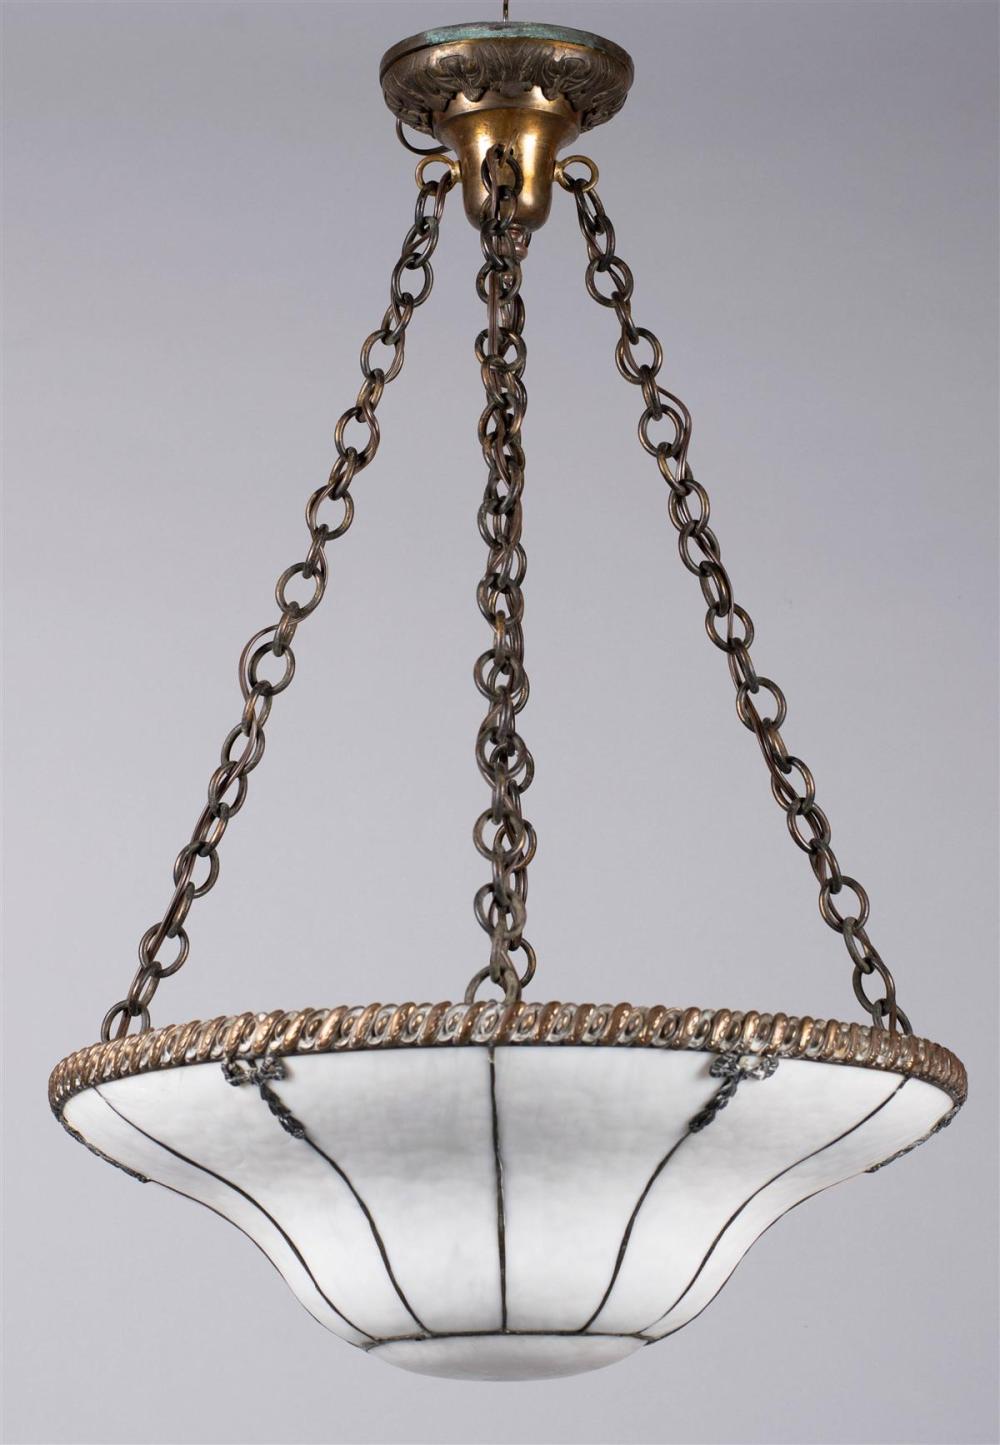 INVERTED GLASS DOME CHANDELIER 33bf92